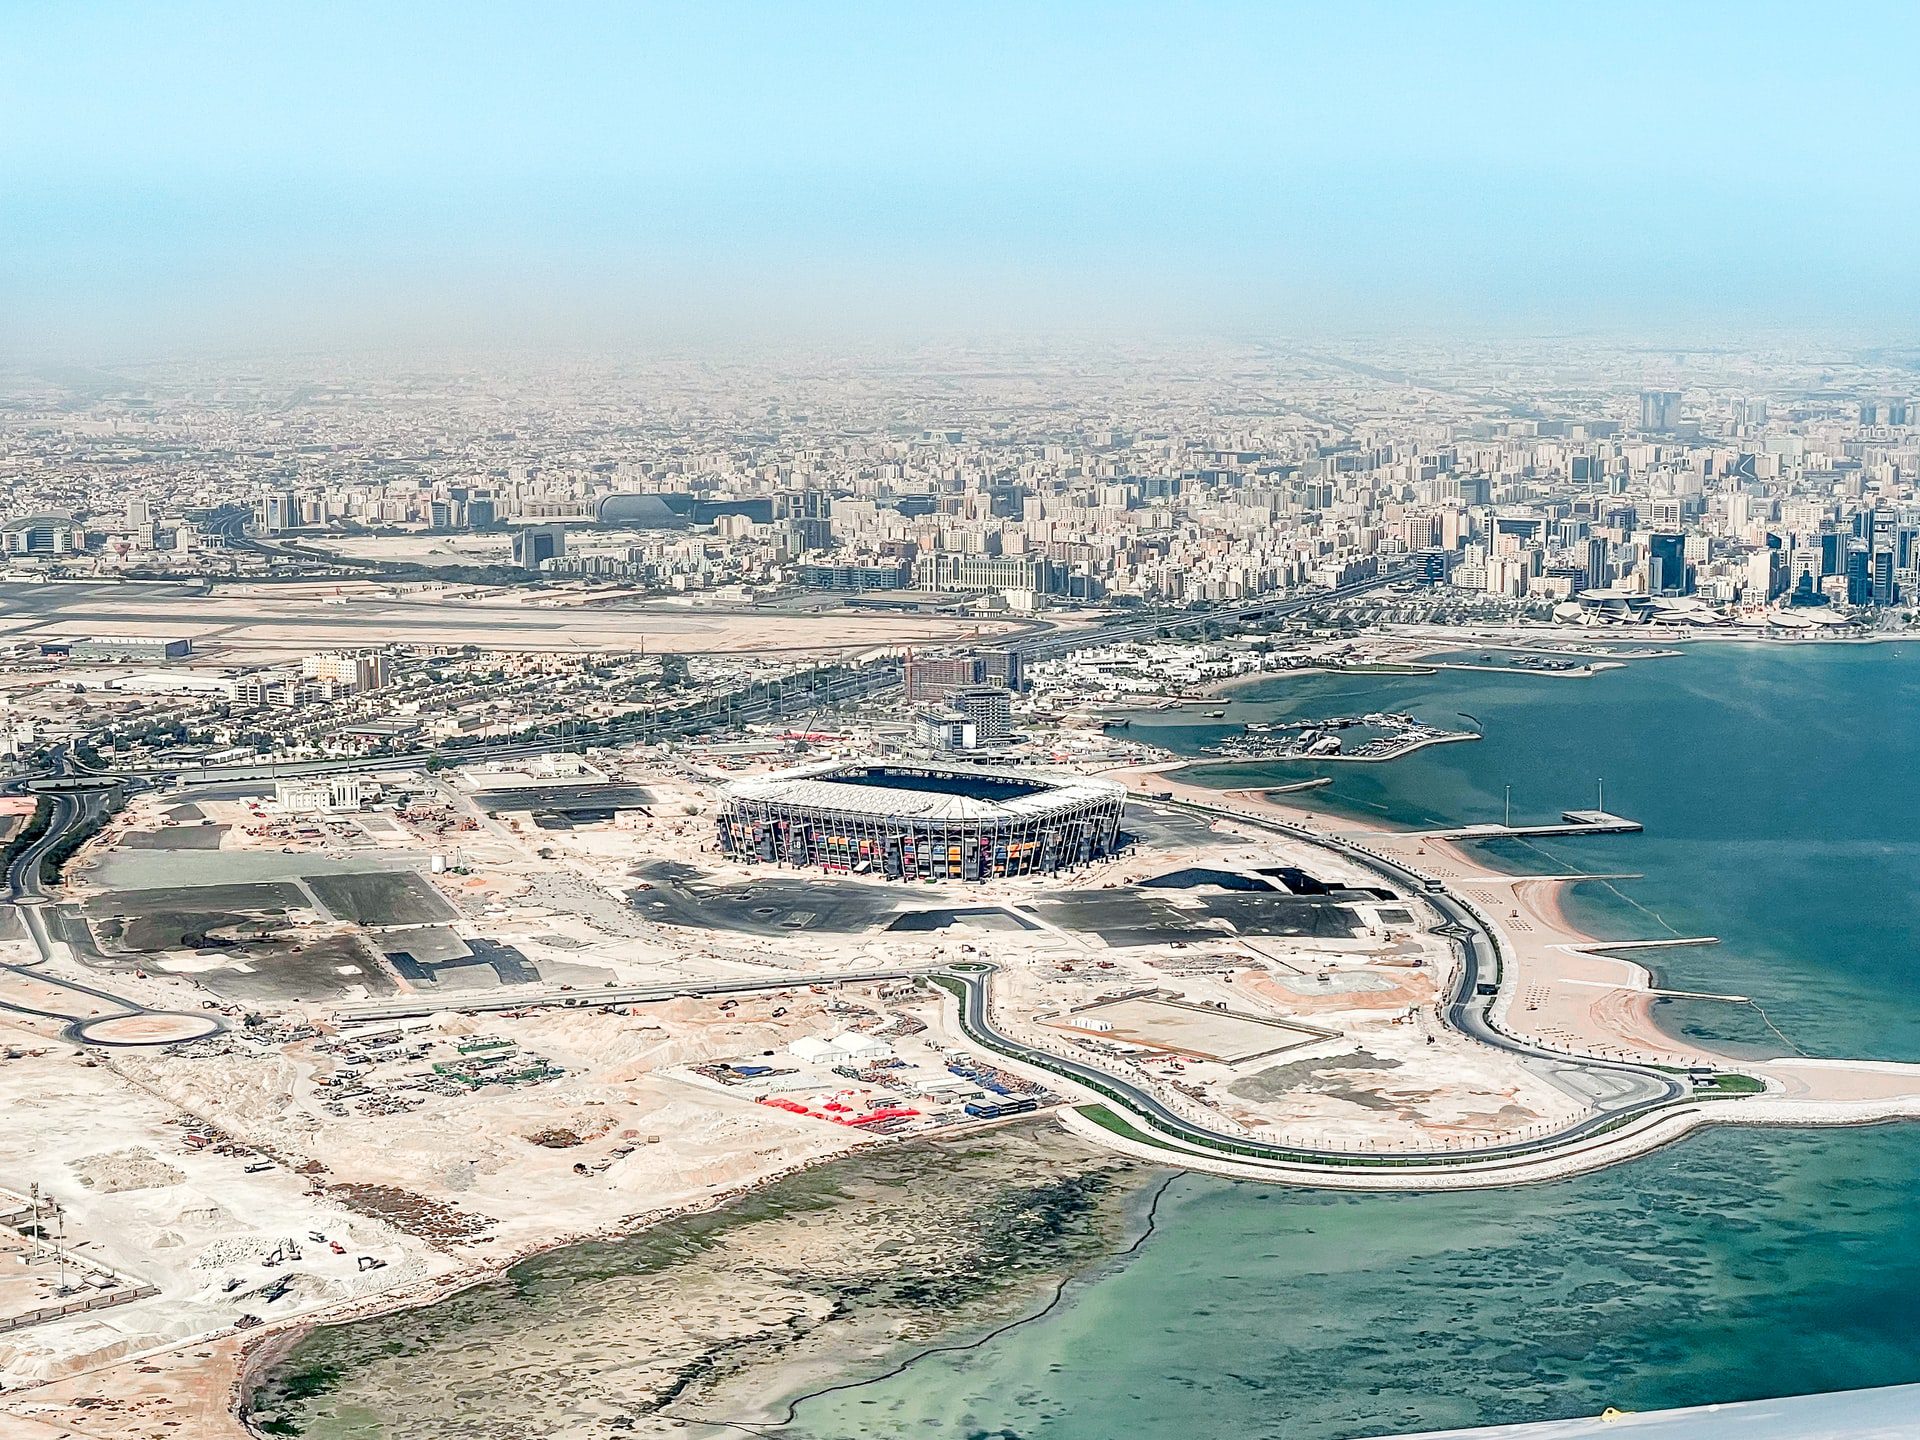 World Cup organisers hope to attract 1.2 million visitors to Qatar during the event in November next year.